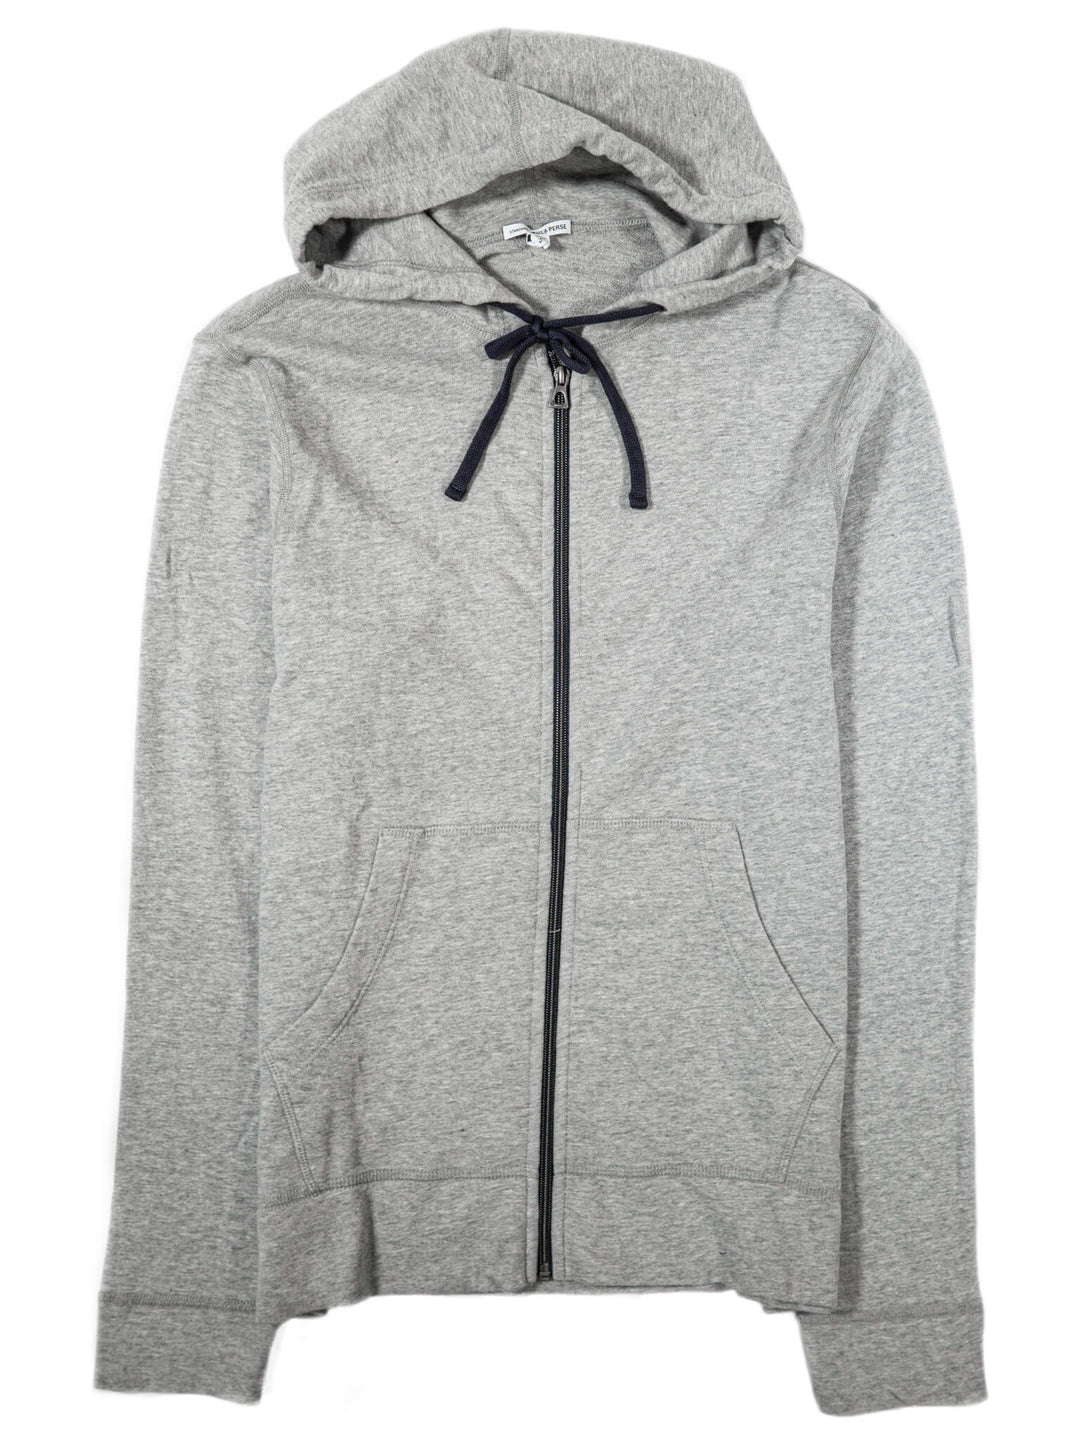 JAMES PERSE FRENCH TERRY HOODIE IN HEATHER